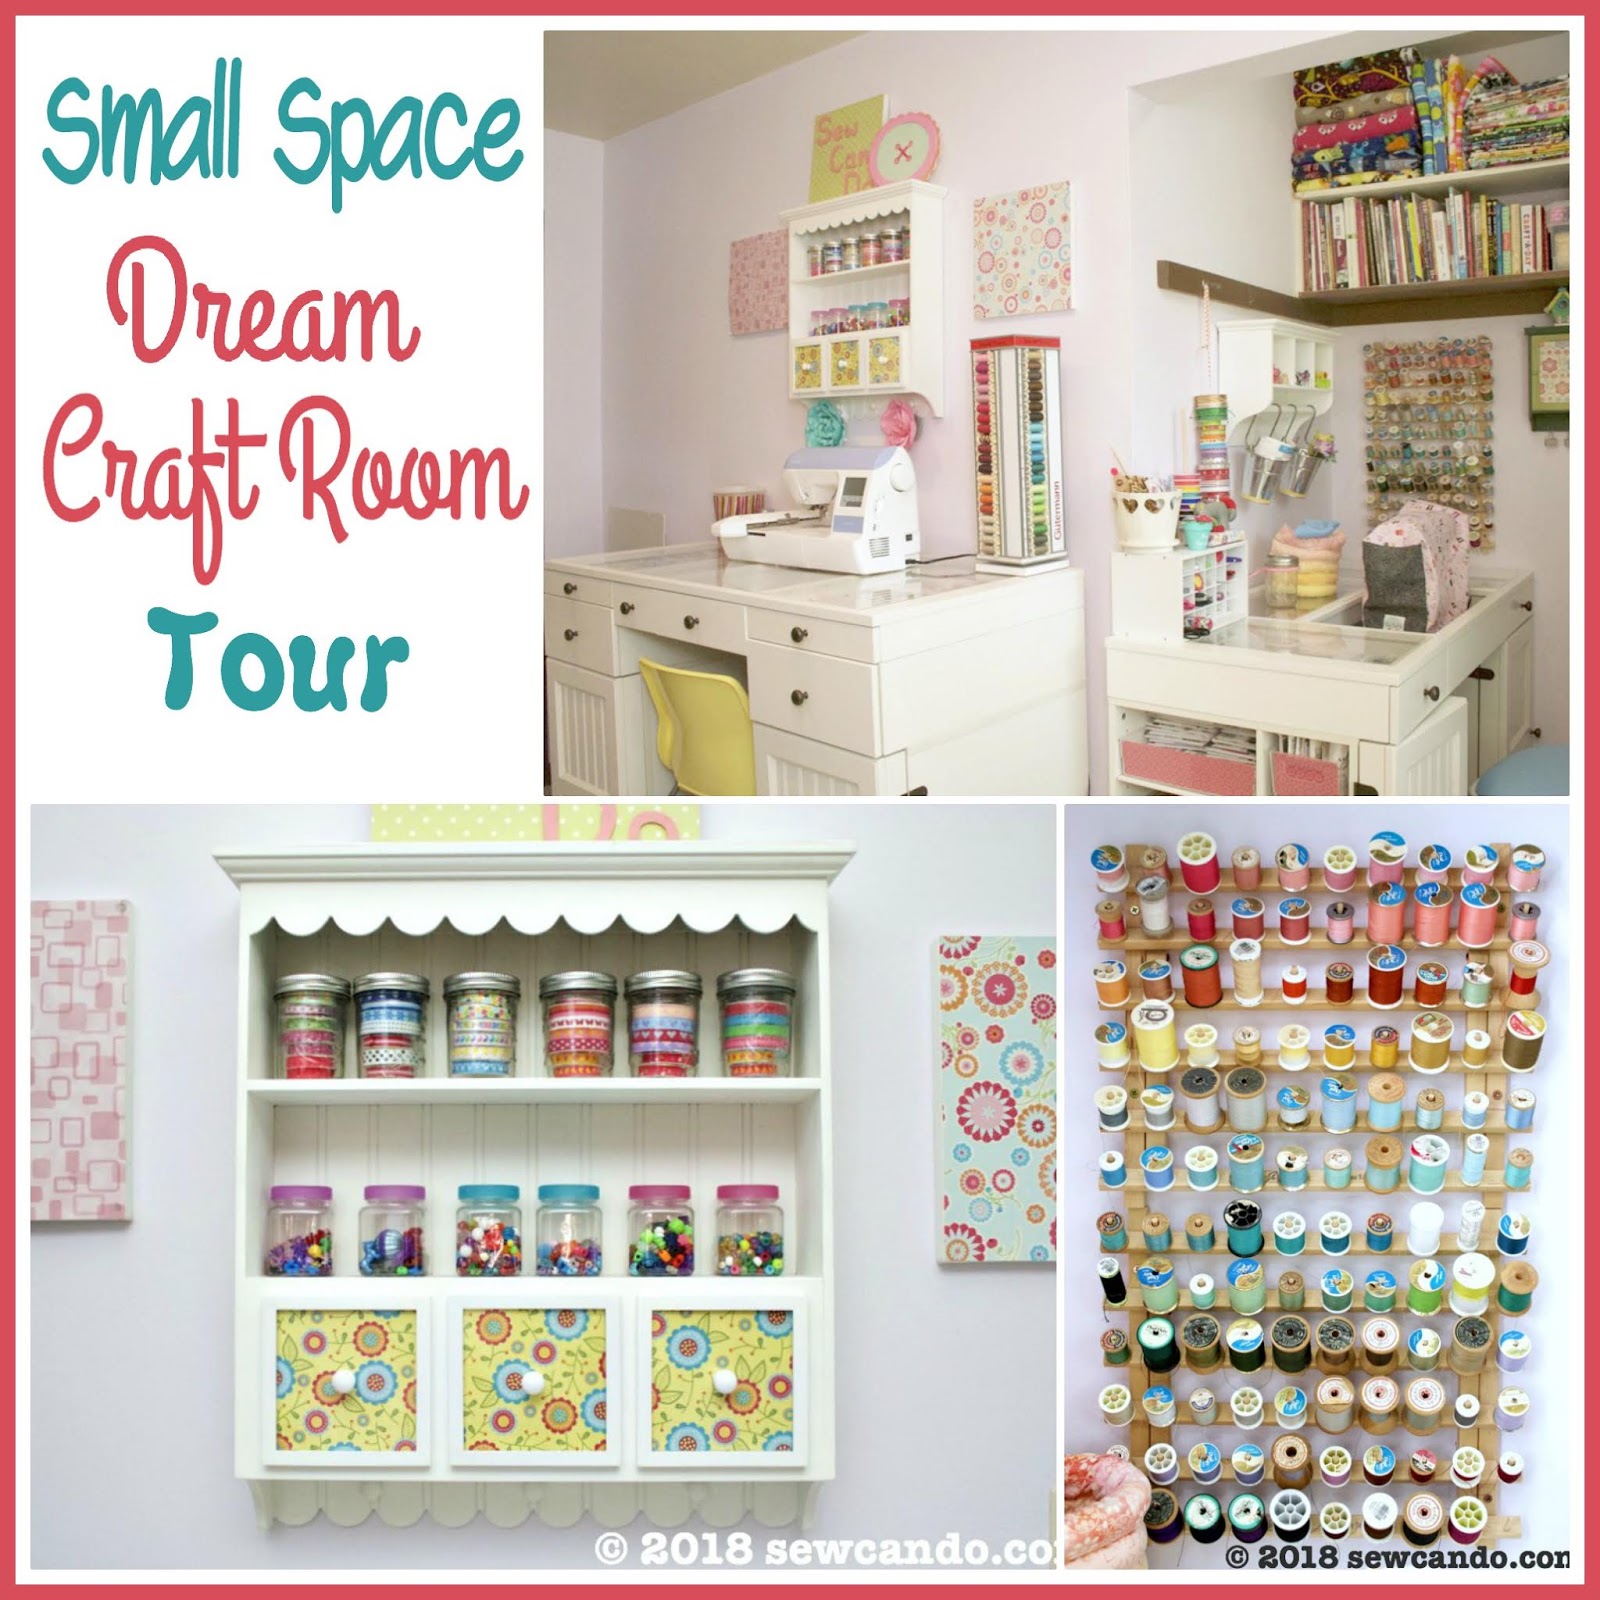 craft room storage ideas and tour of my creative space - 365 Days